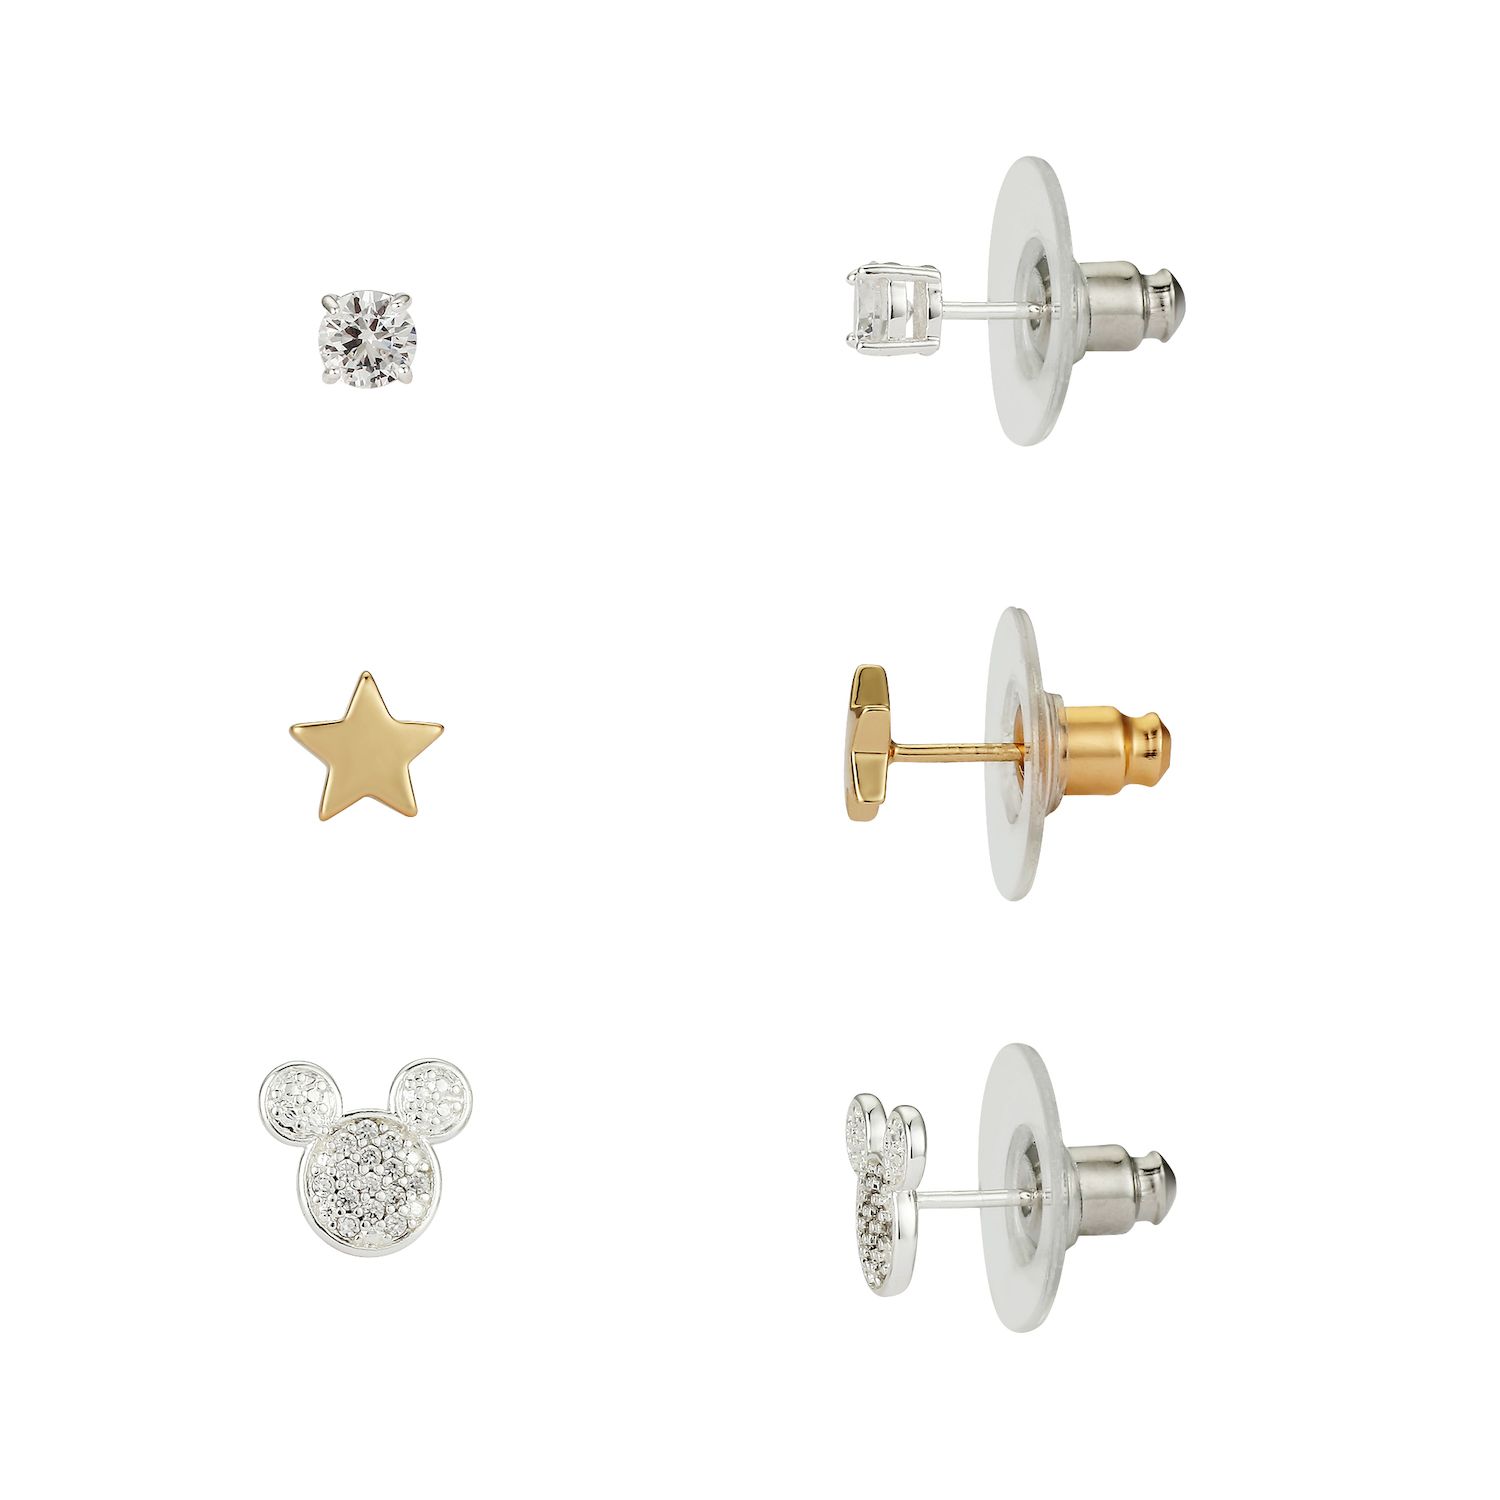 Image for Disney 's Mickey Mouse Two Tone Cubic Zirconia Nickel Free Earring Set at Kohl's.